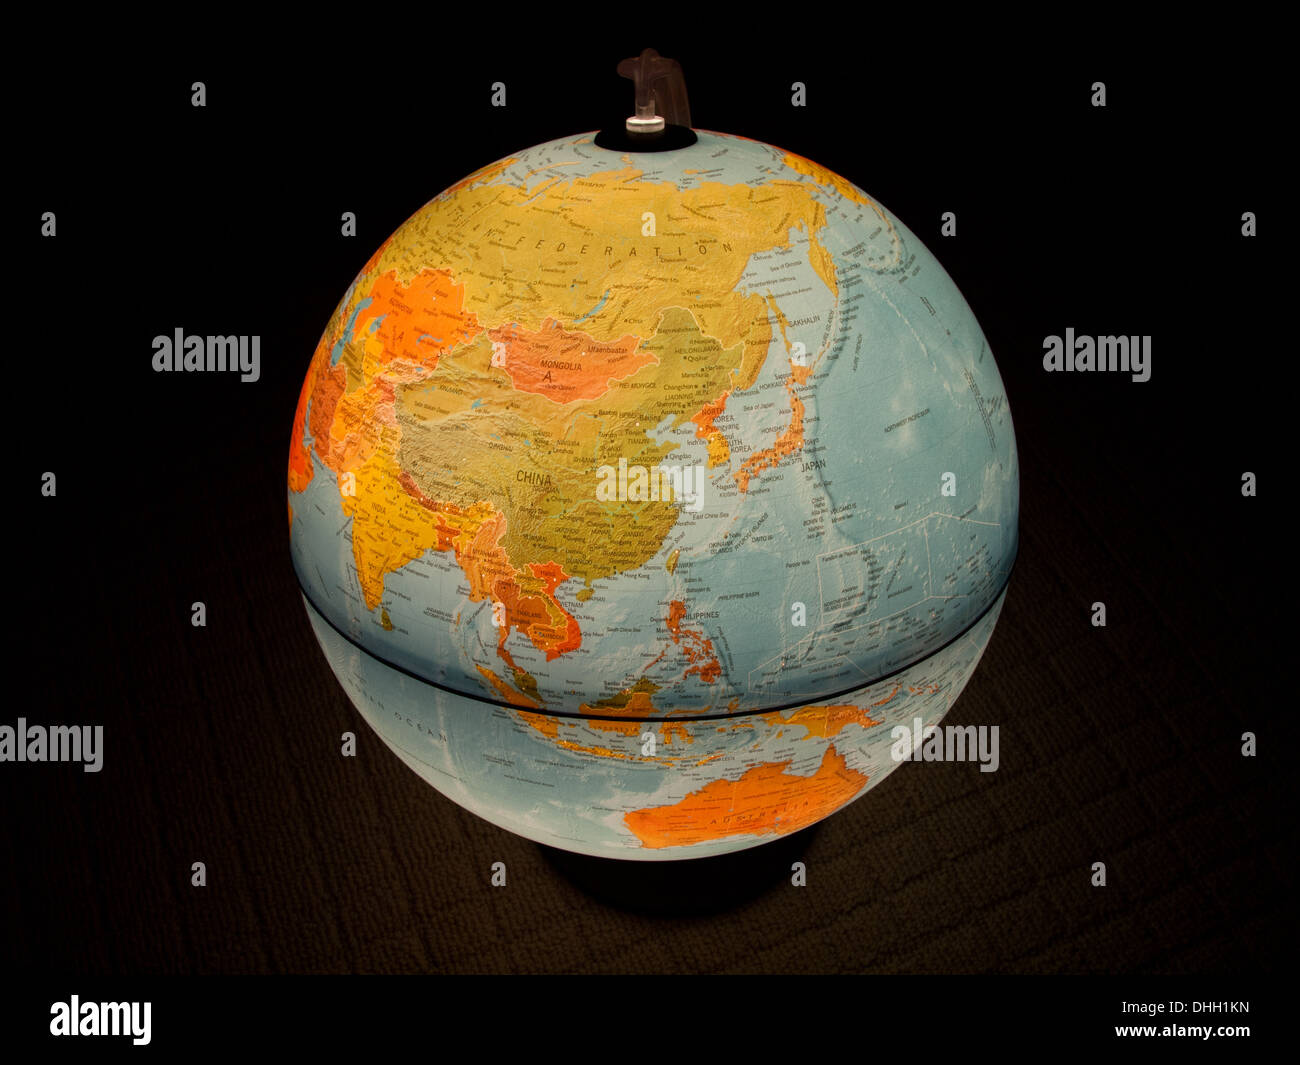 A view of Asia and the Far East on a beautiful, illuminated globe. Stock Photo